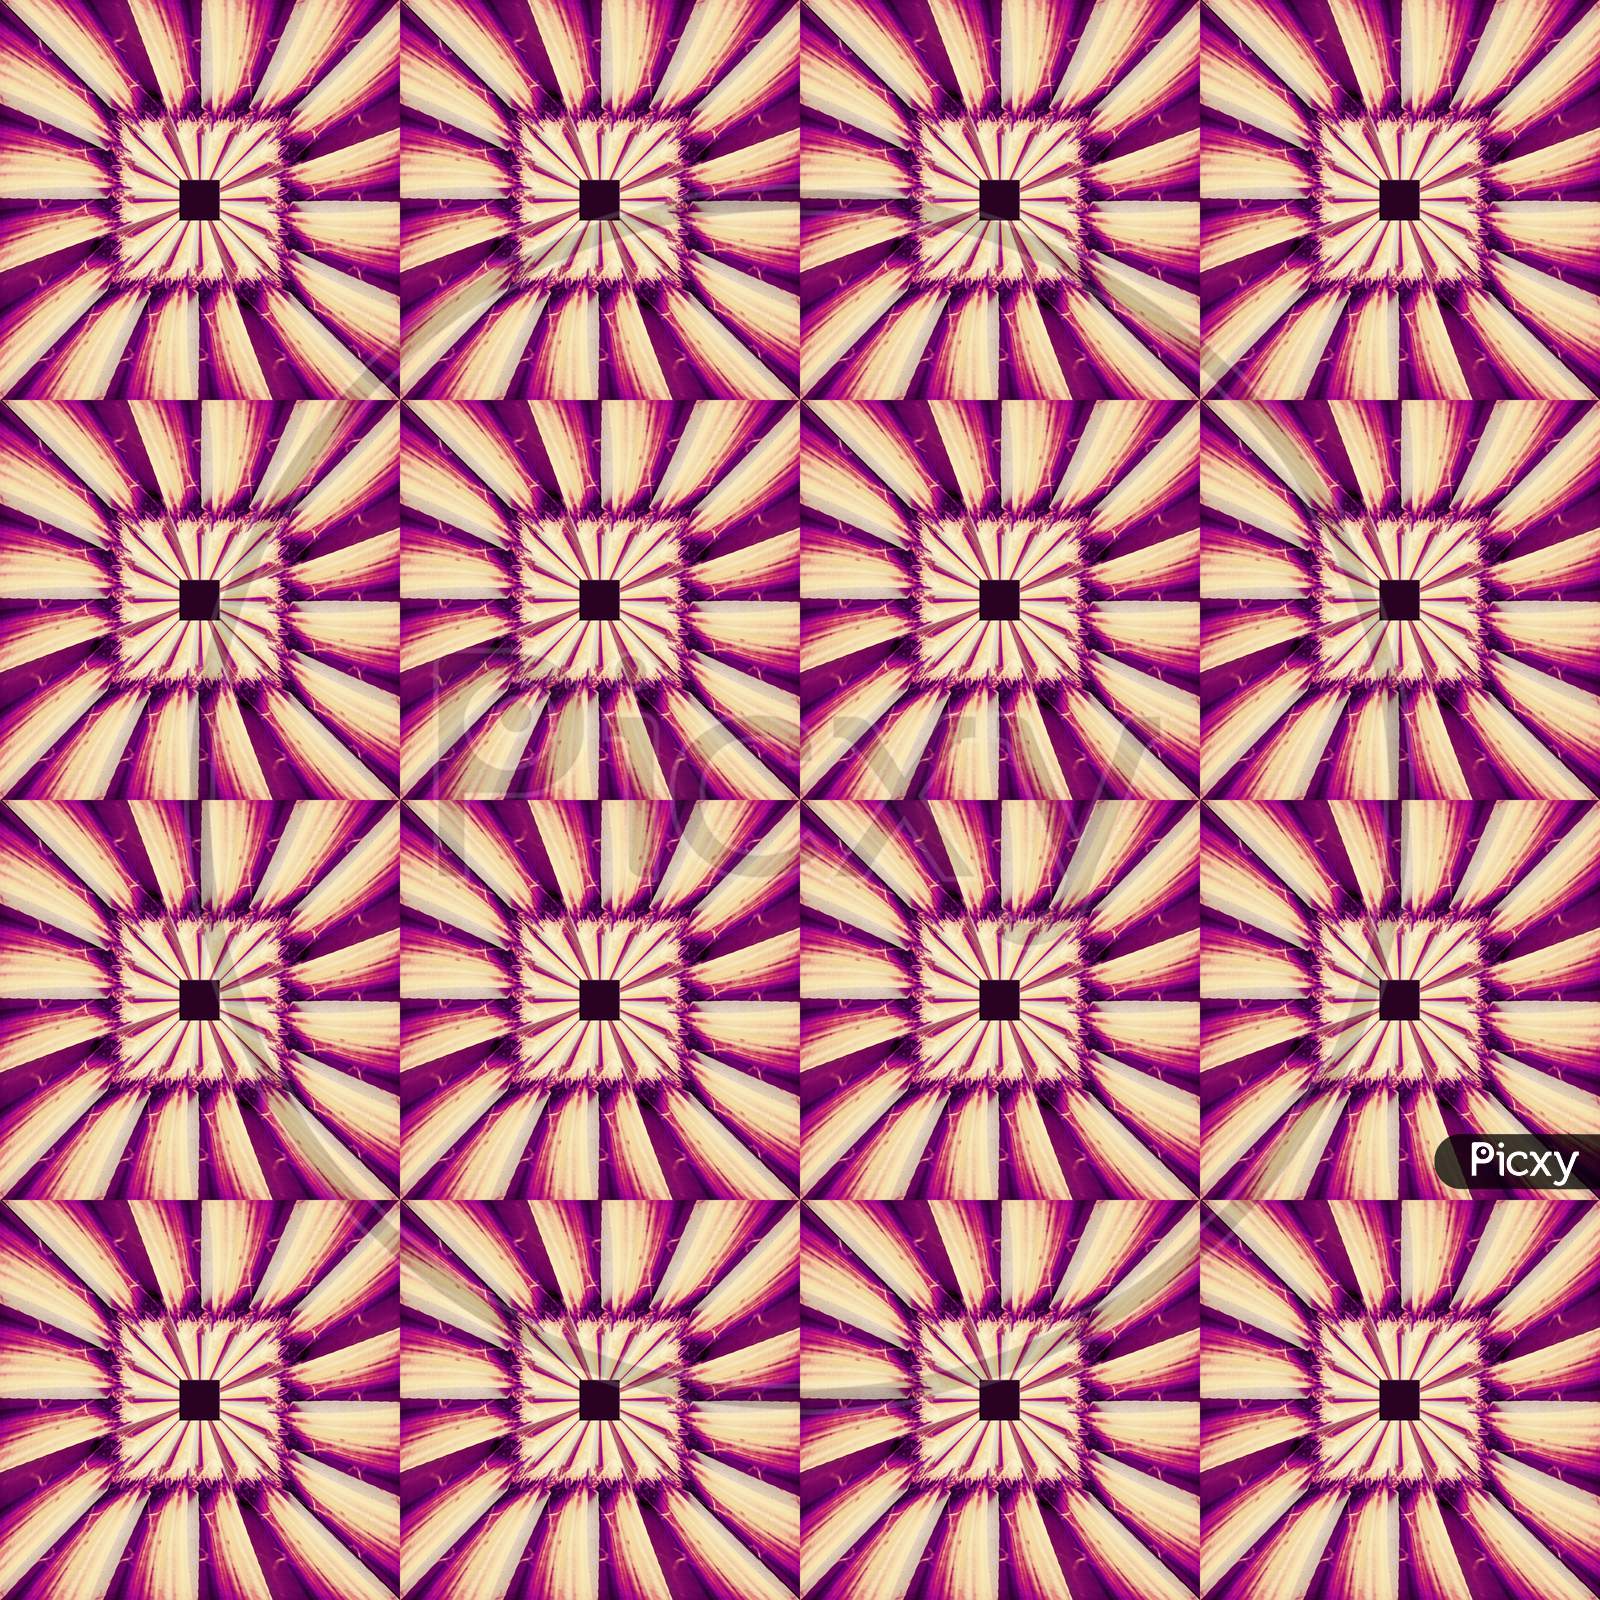 Wavy Square And Center Swirl Flower Seamless Pattern